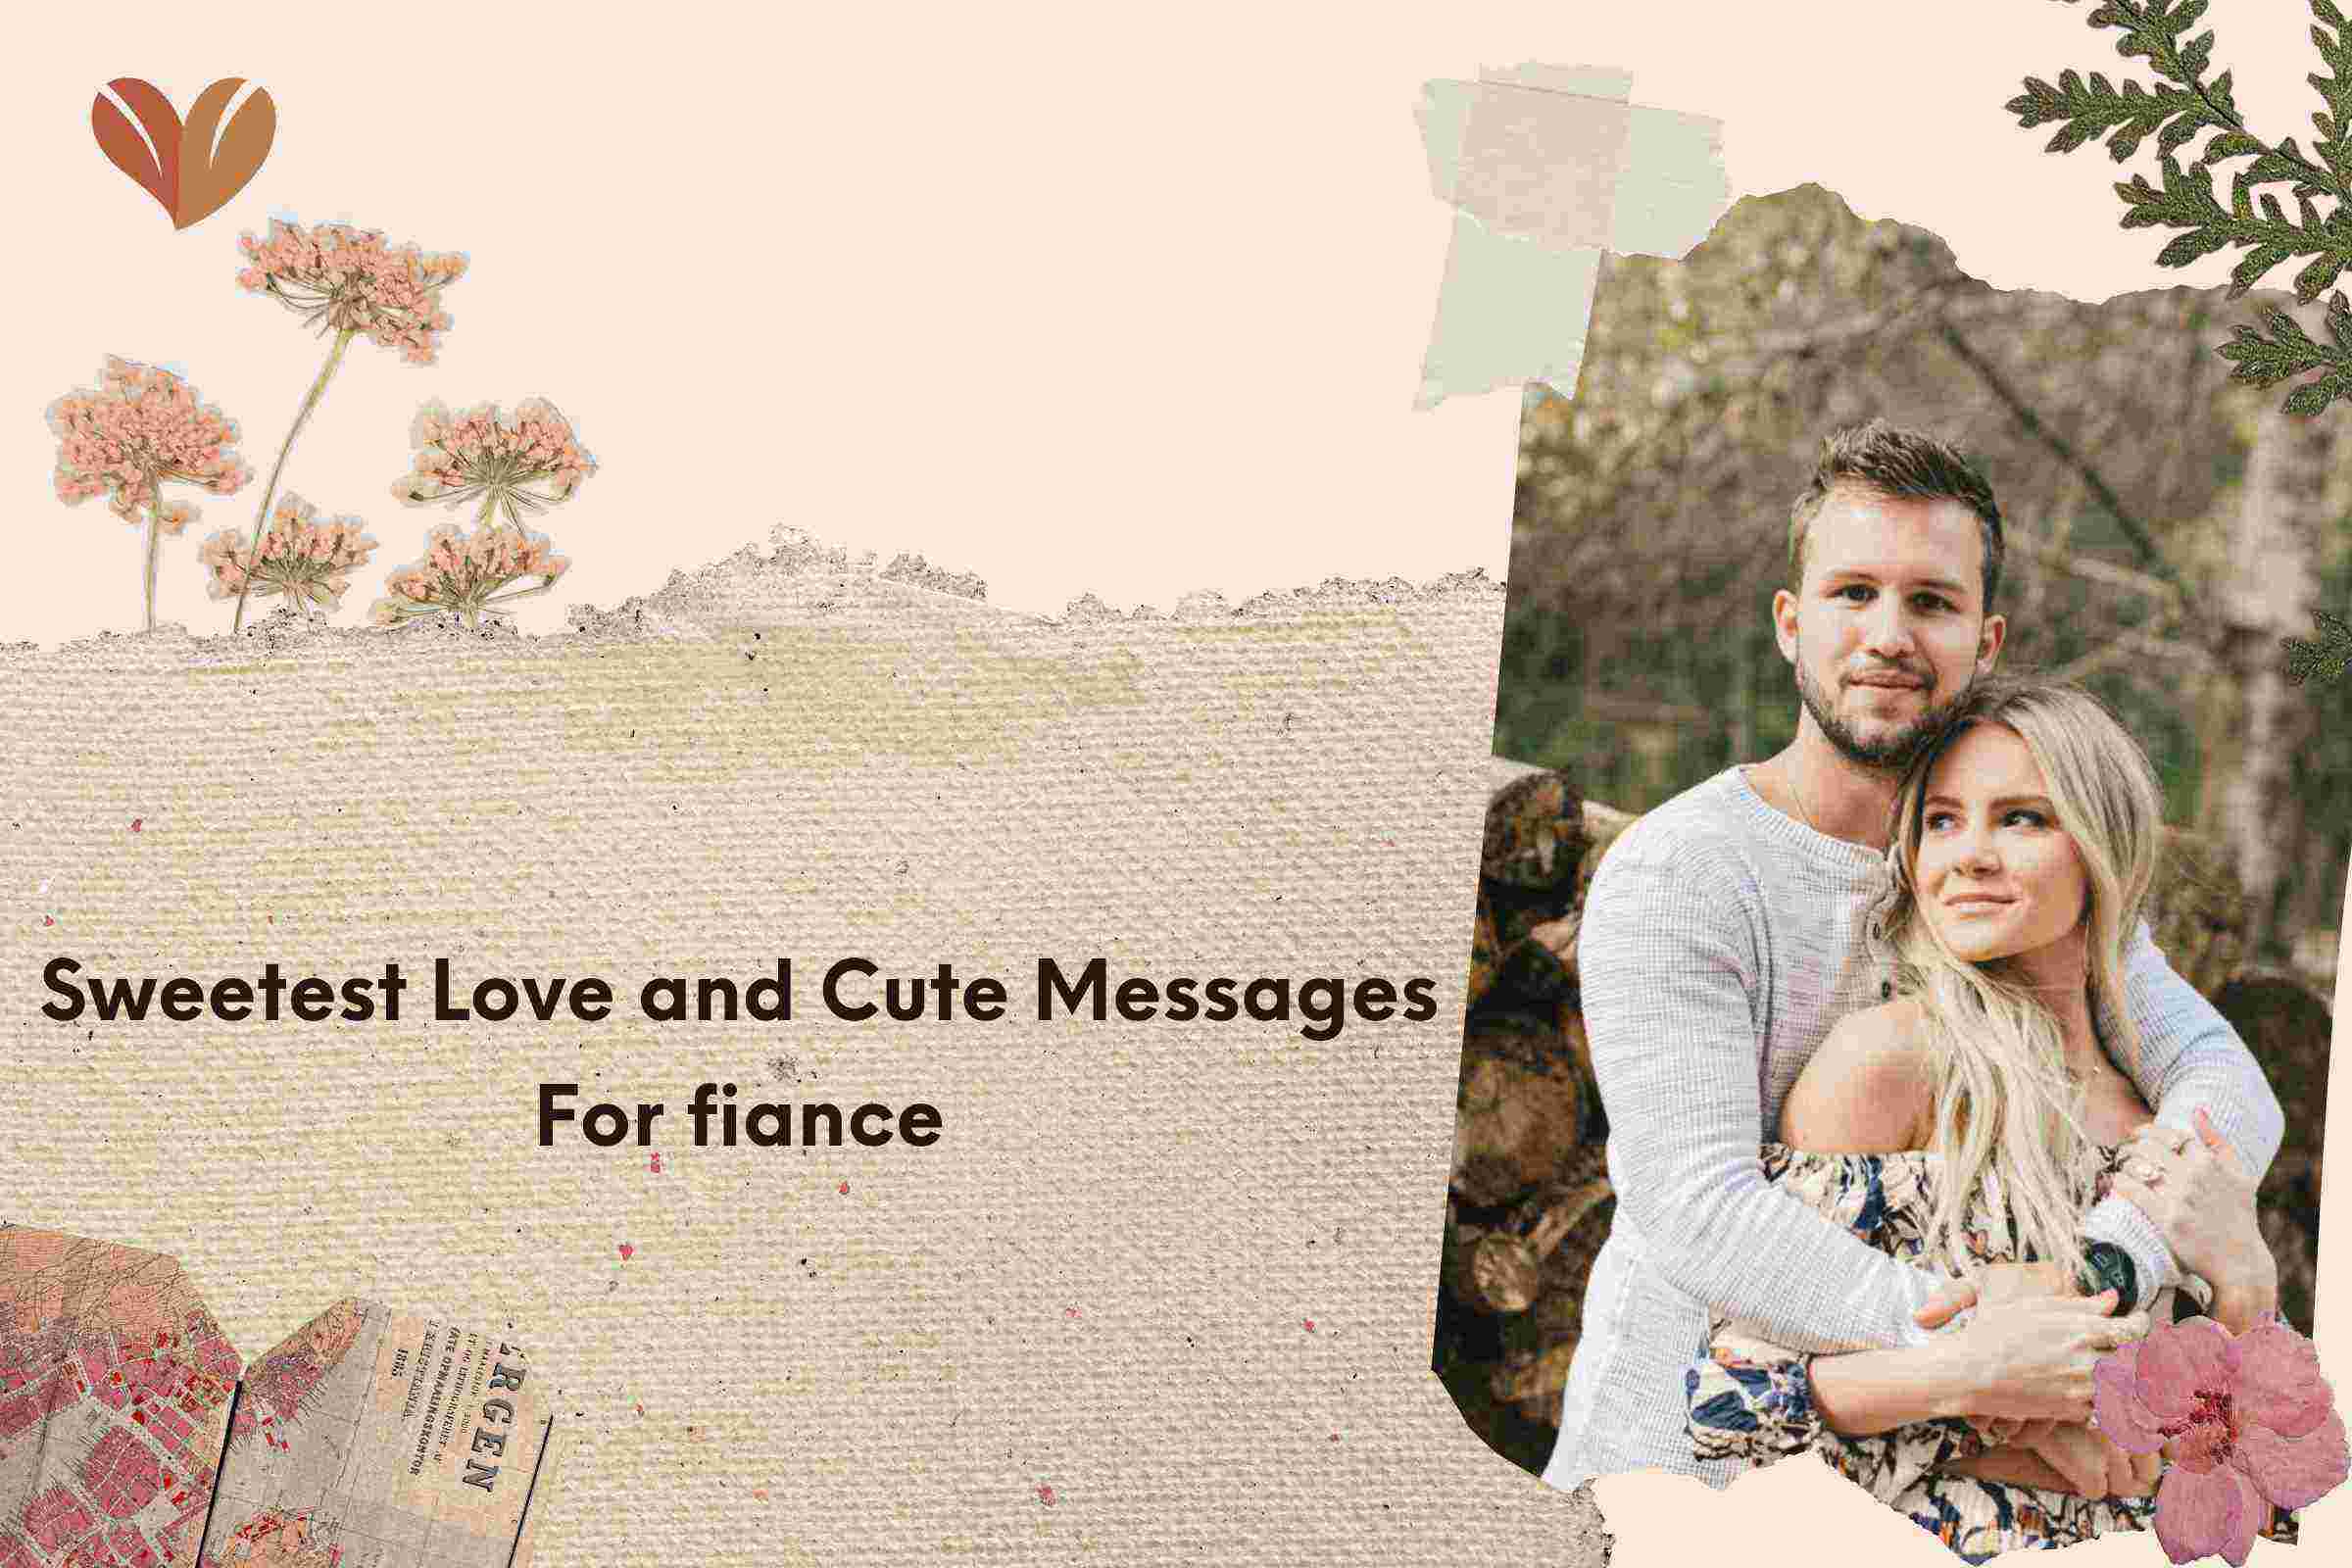 Sweetest Love and Cute Messages For fiance